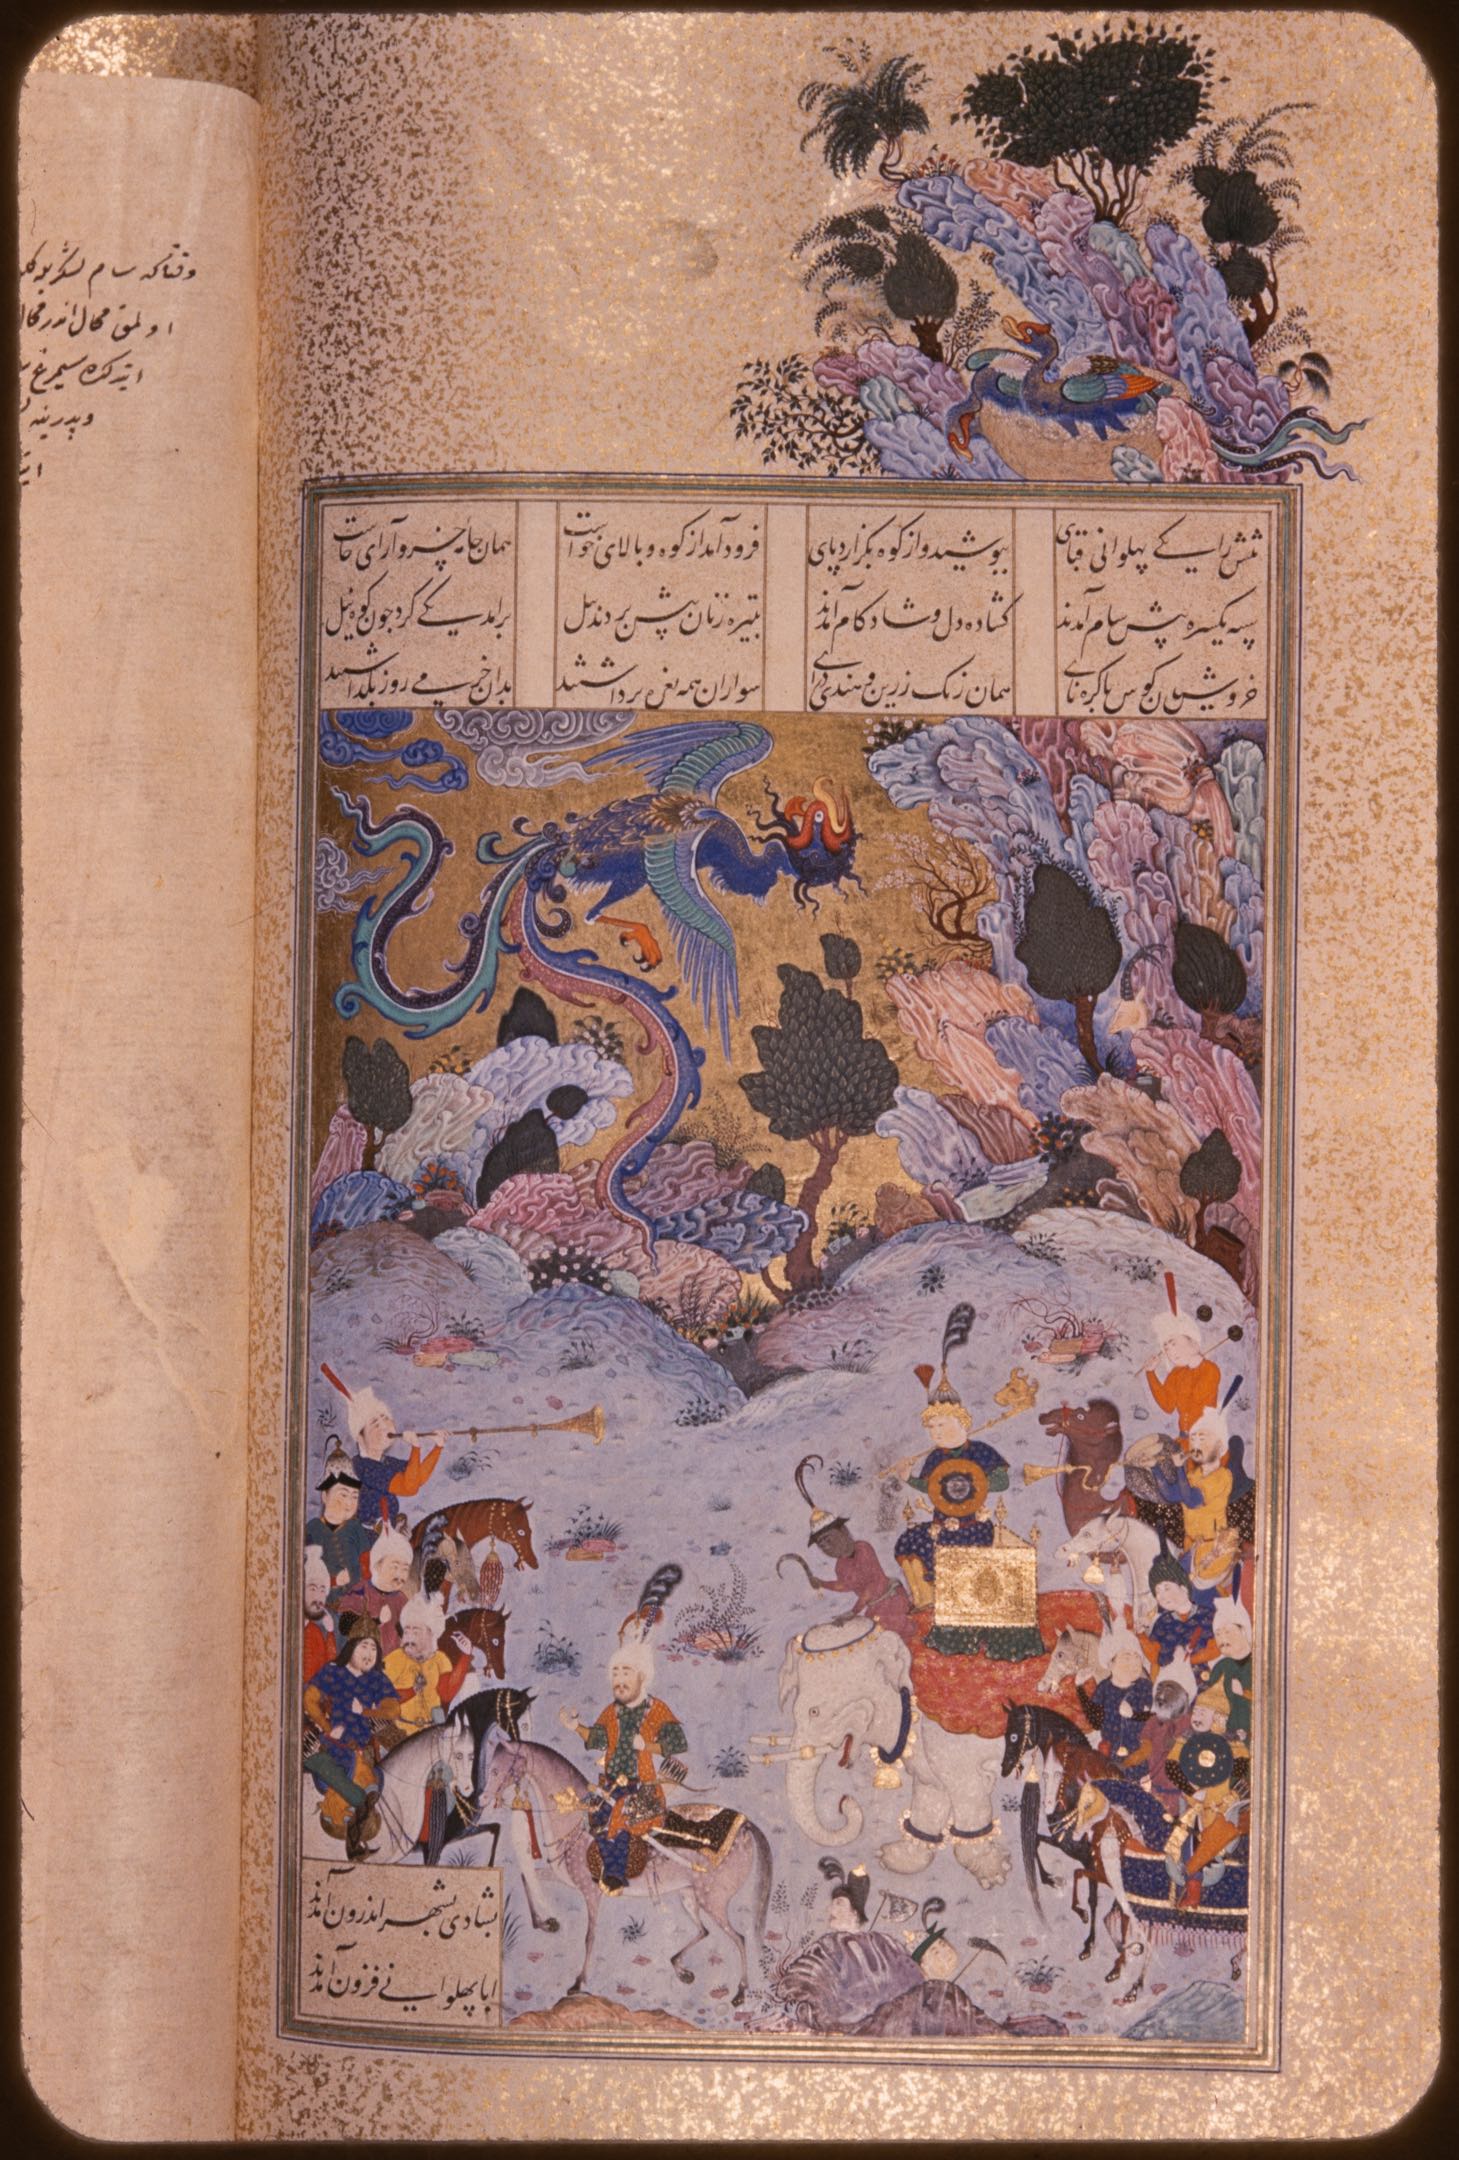 Sam returns with his son Zal (private collection), folio from the Houghton Shahnama shown in situ